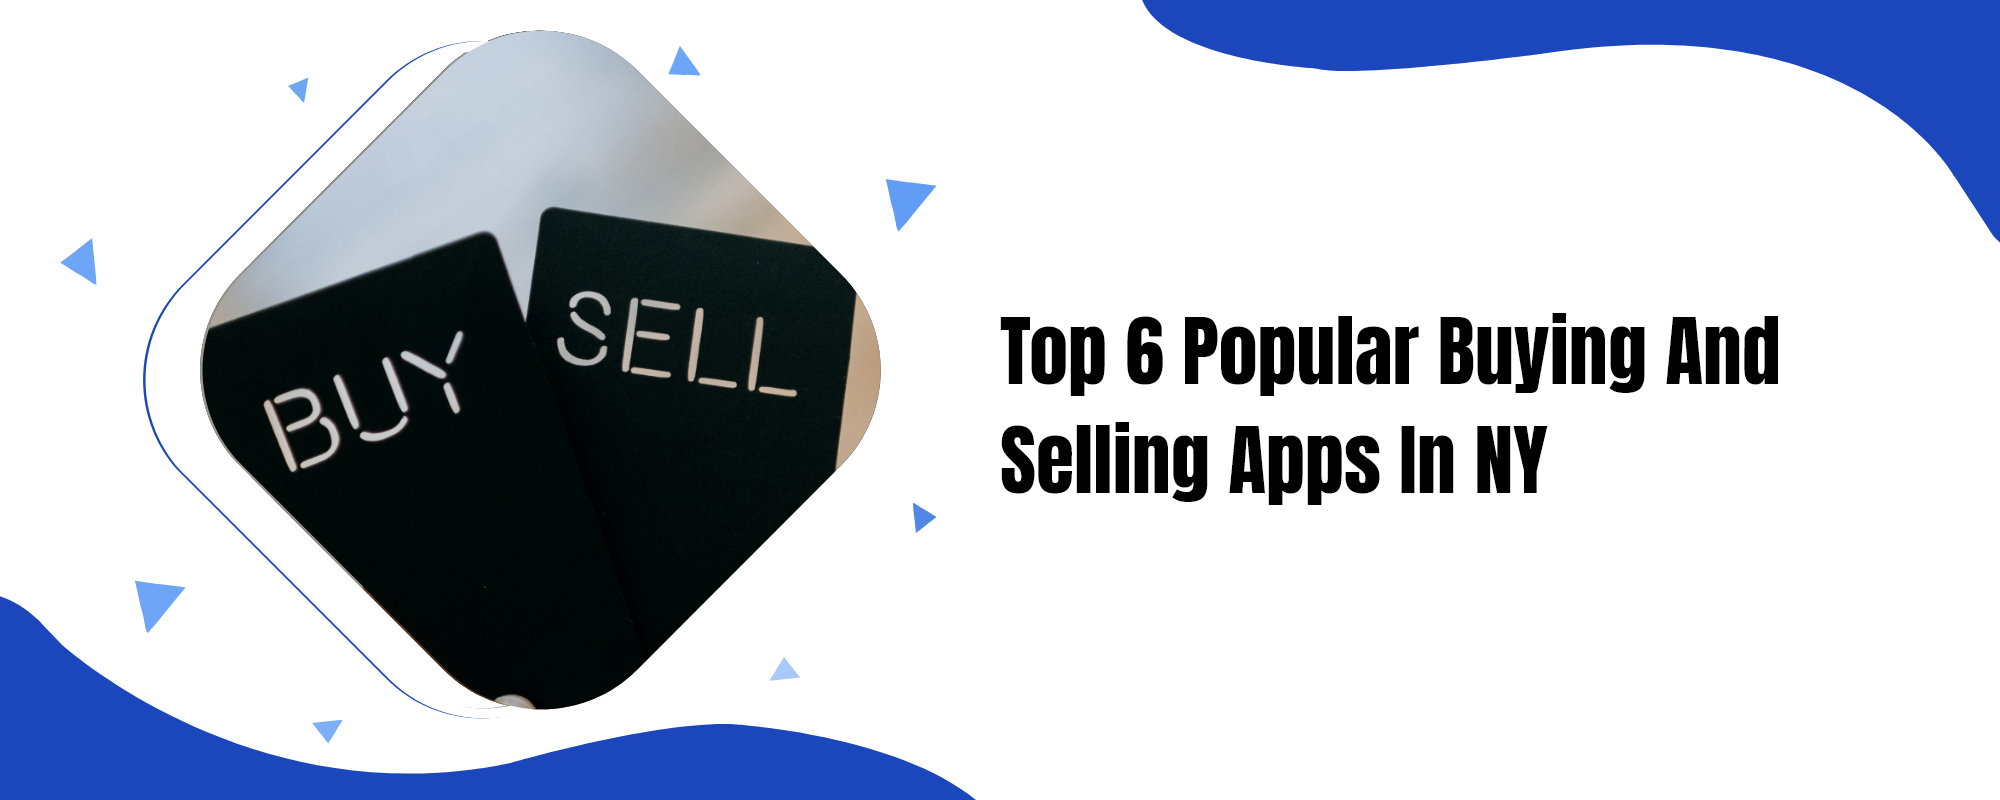 Buying and selling apps in NY